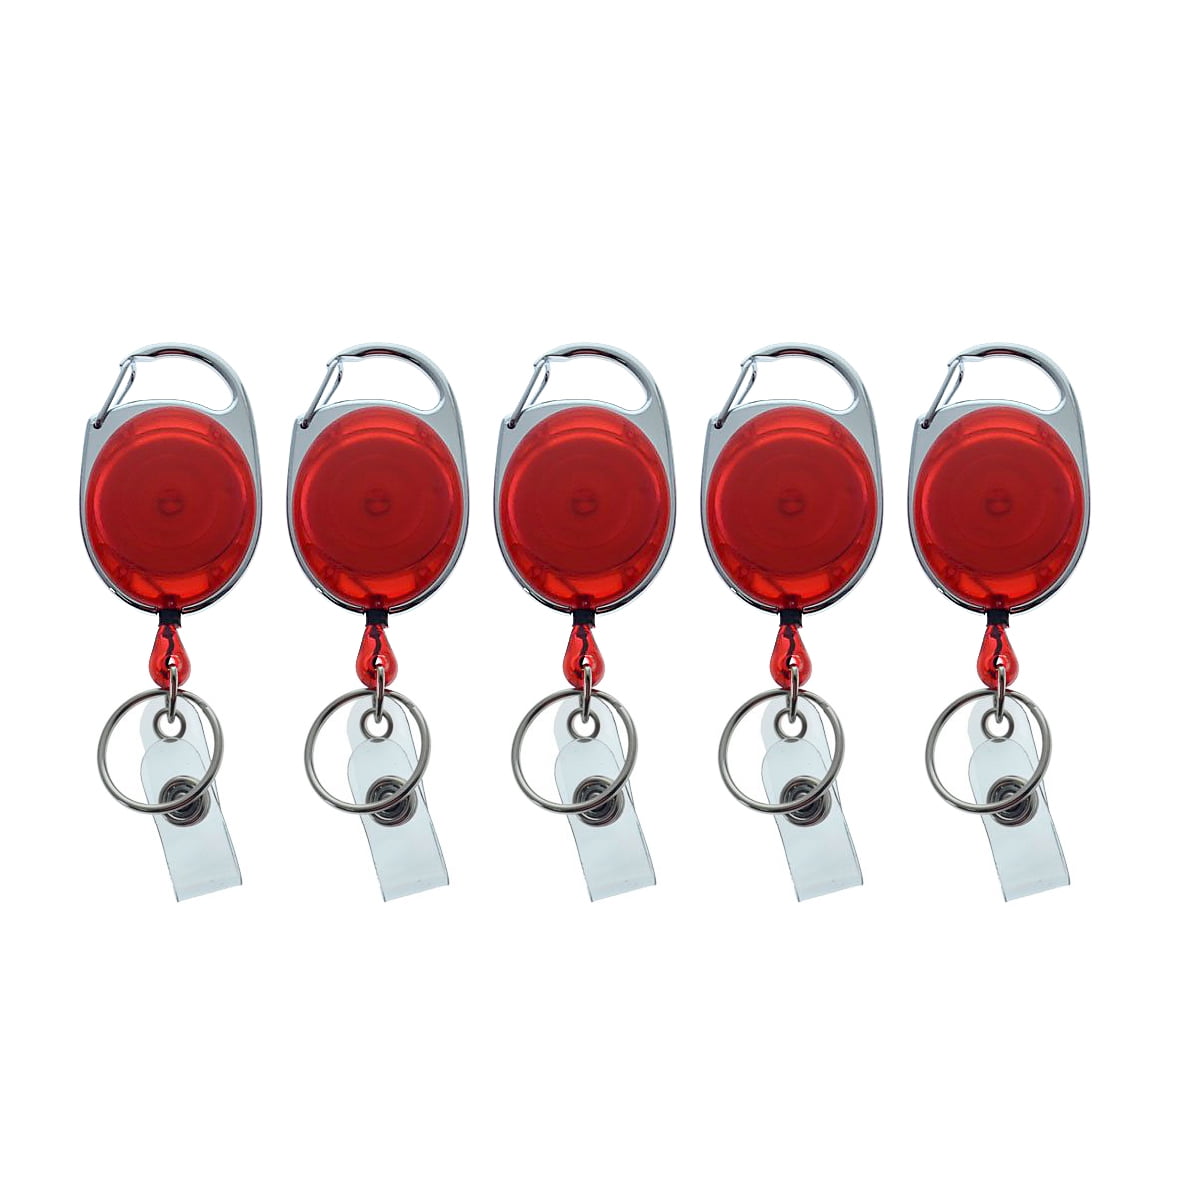 5 ID Badge Reels Lanyards Retractable with Belt Clip & Plastic Strap Red 